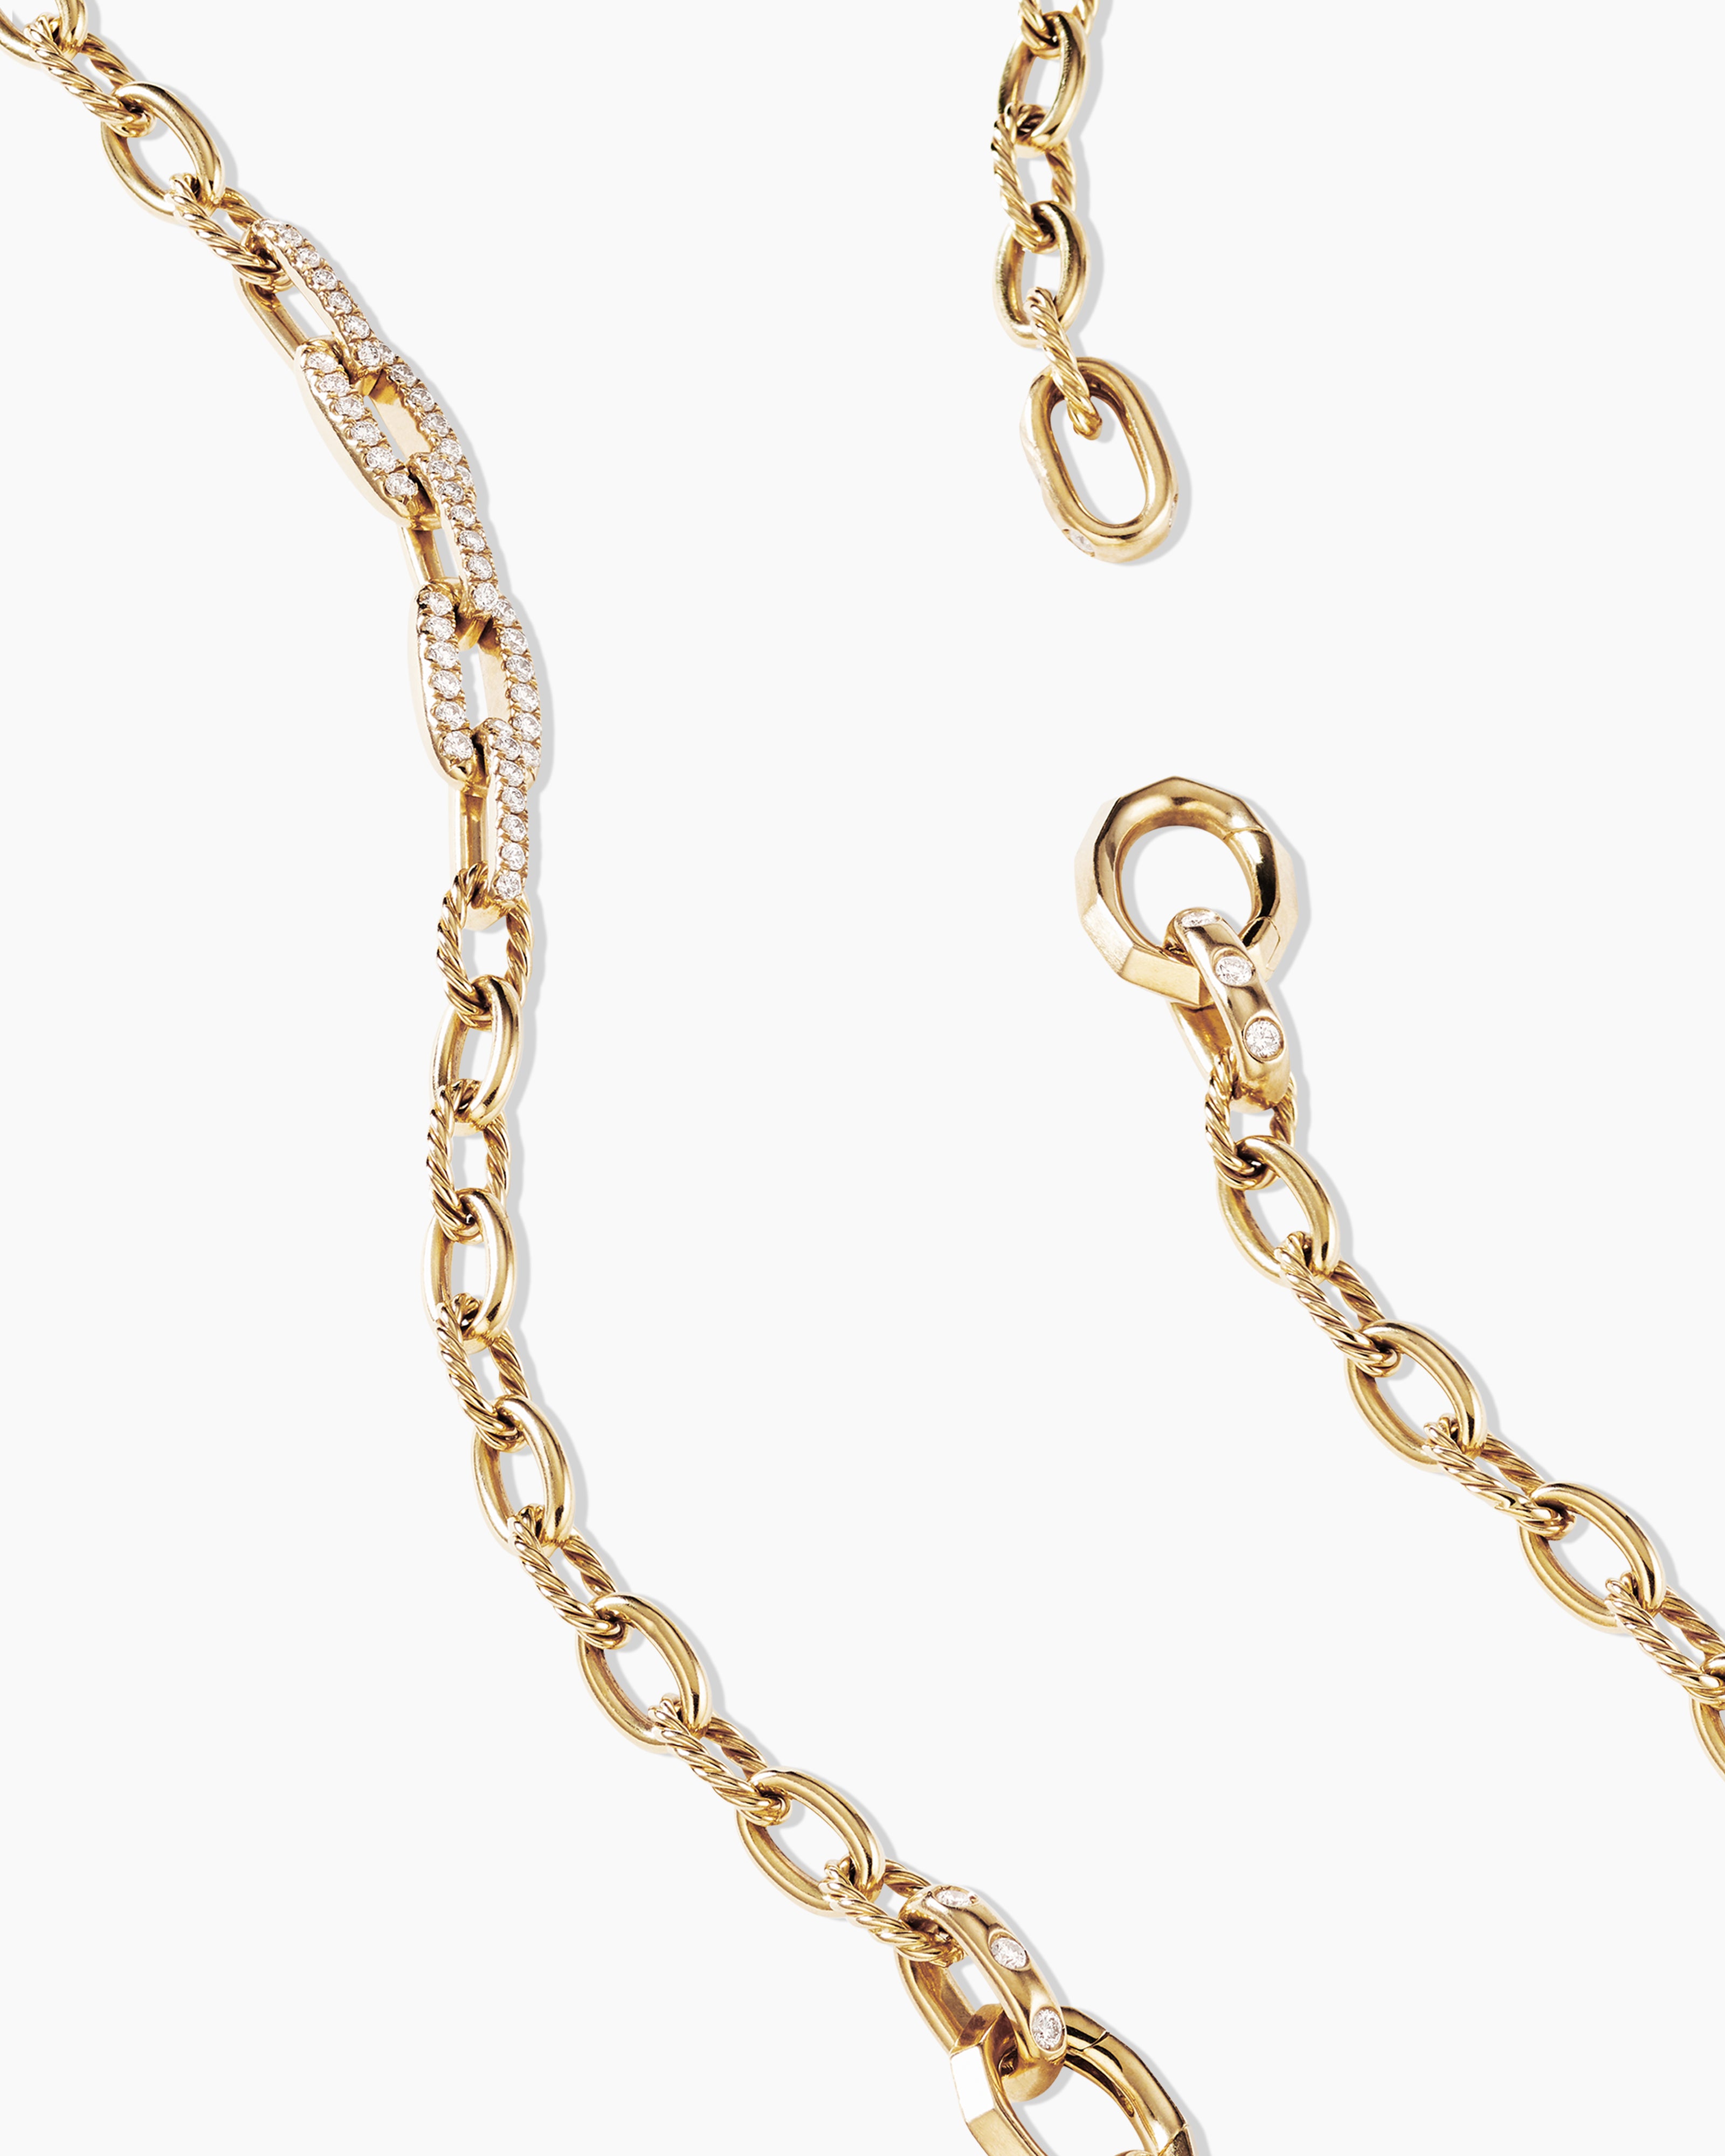 Stax Convertible Chain Yurman with | Diamonds, Necklace in Yellow 18K Gold 5mm David